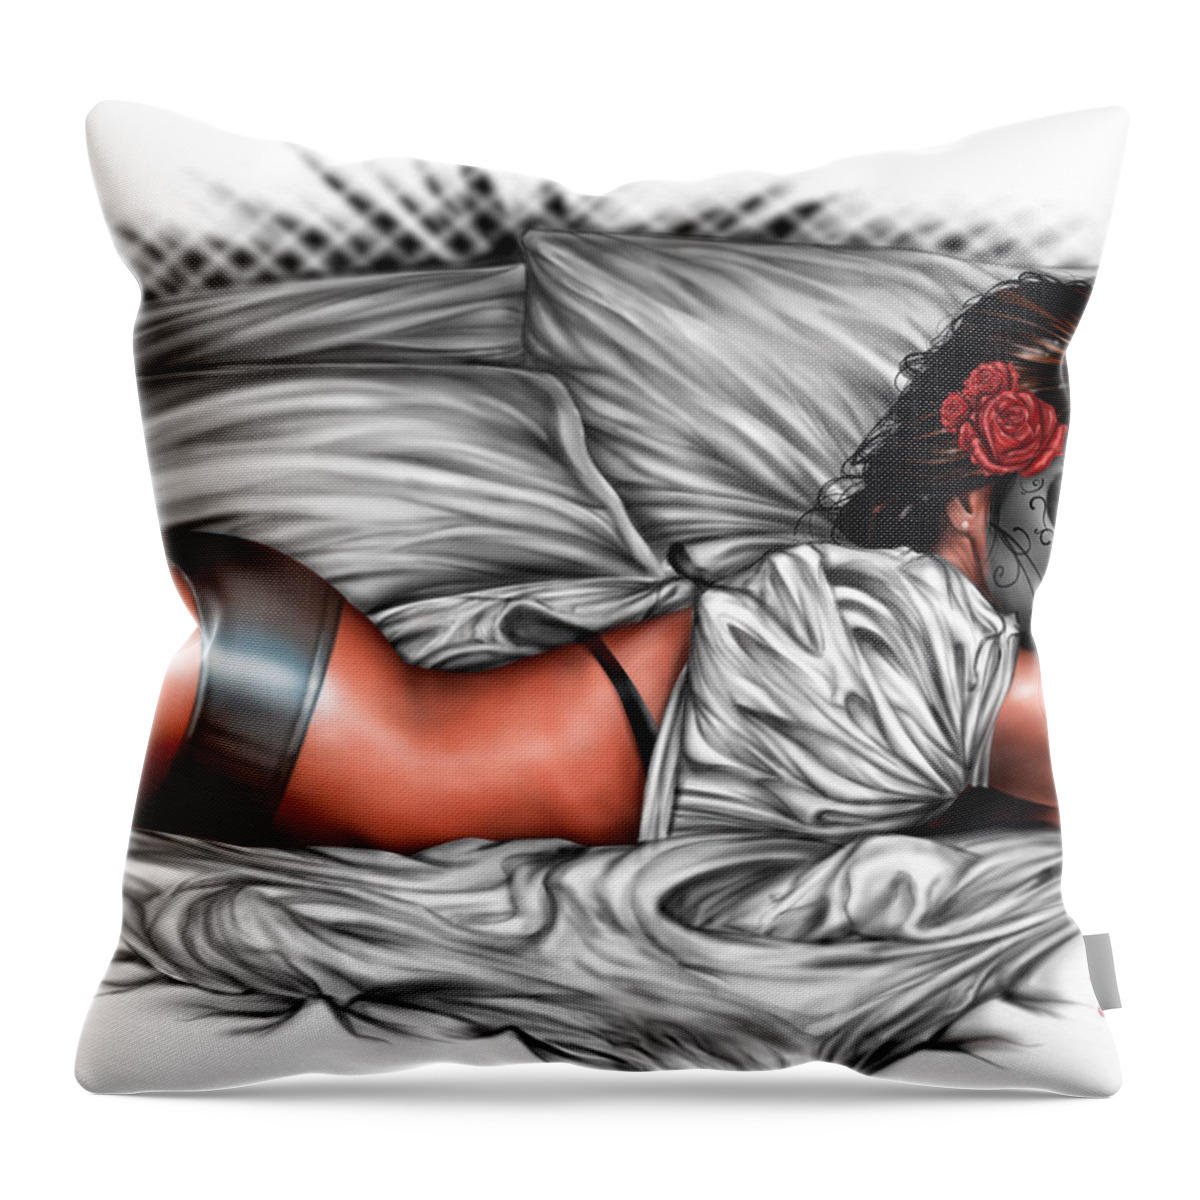 Pete Throw Pillow featuring the painting The Last Judgment by Pete Tapang